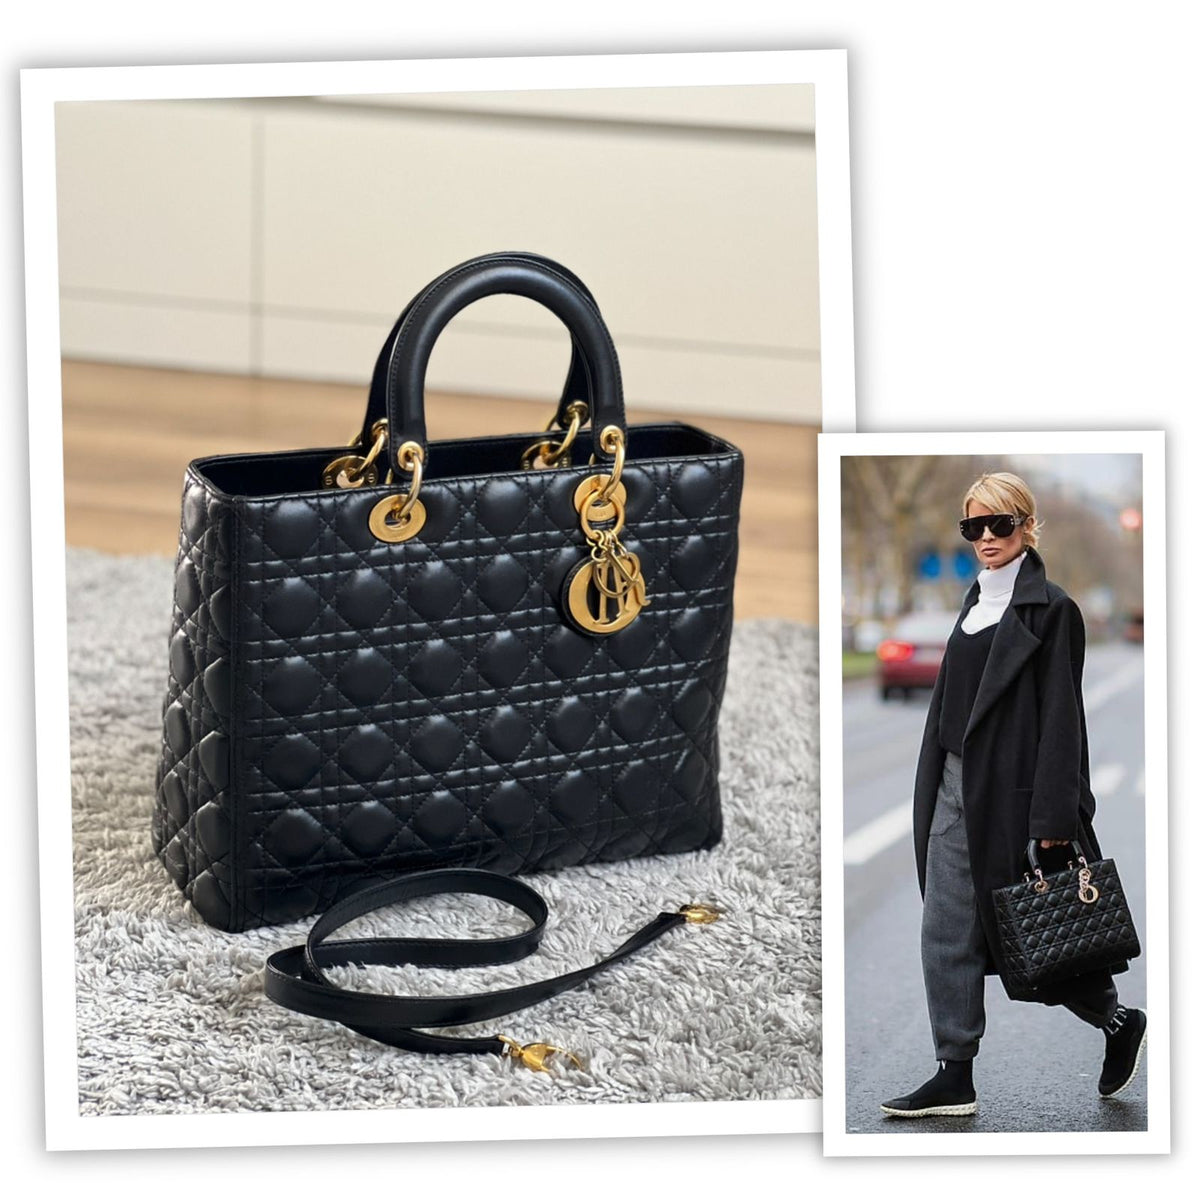 Dior Small Bags & Handbags for Women, Authenticity Guaranteed